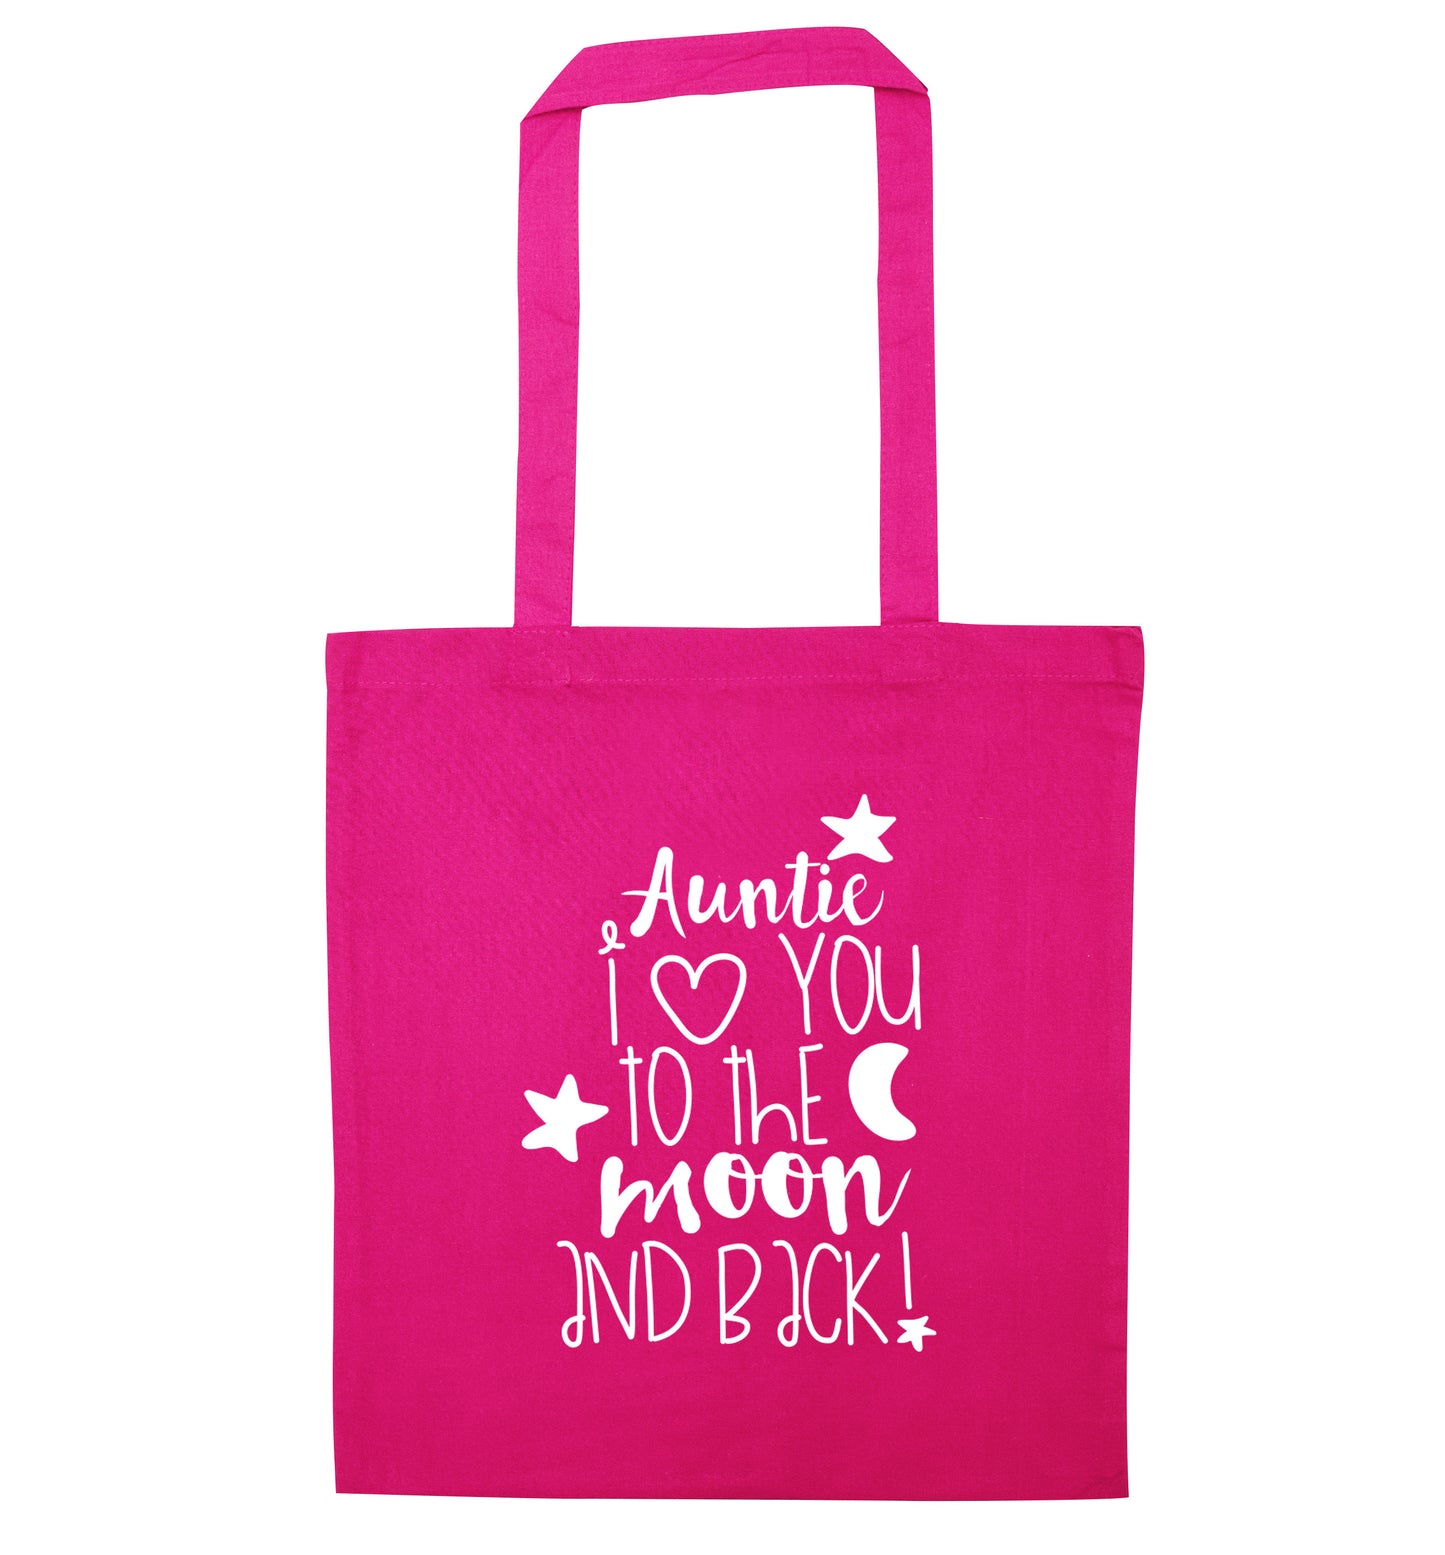 Auntie I love you to the moon and back pink tote bag